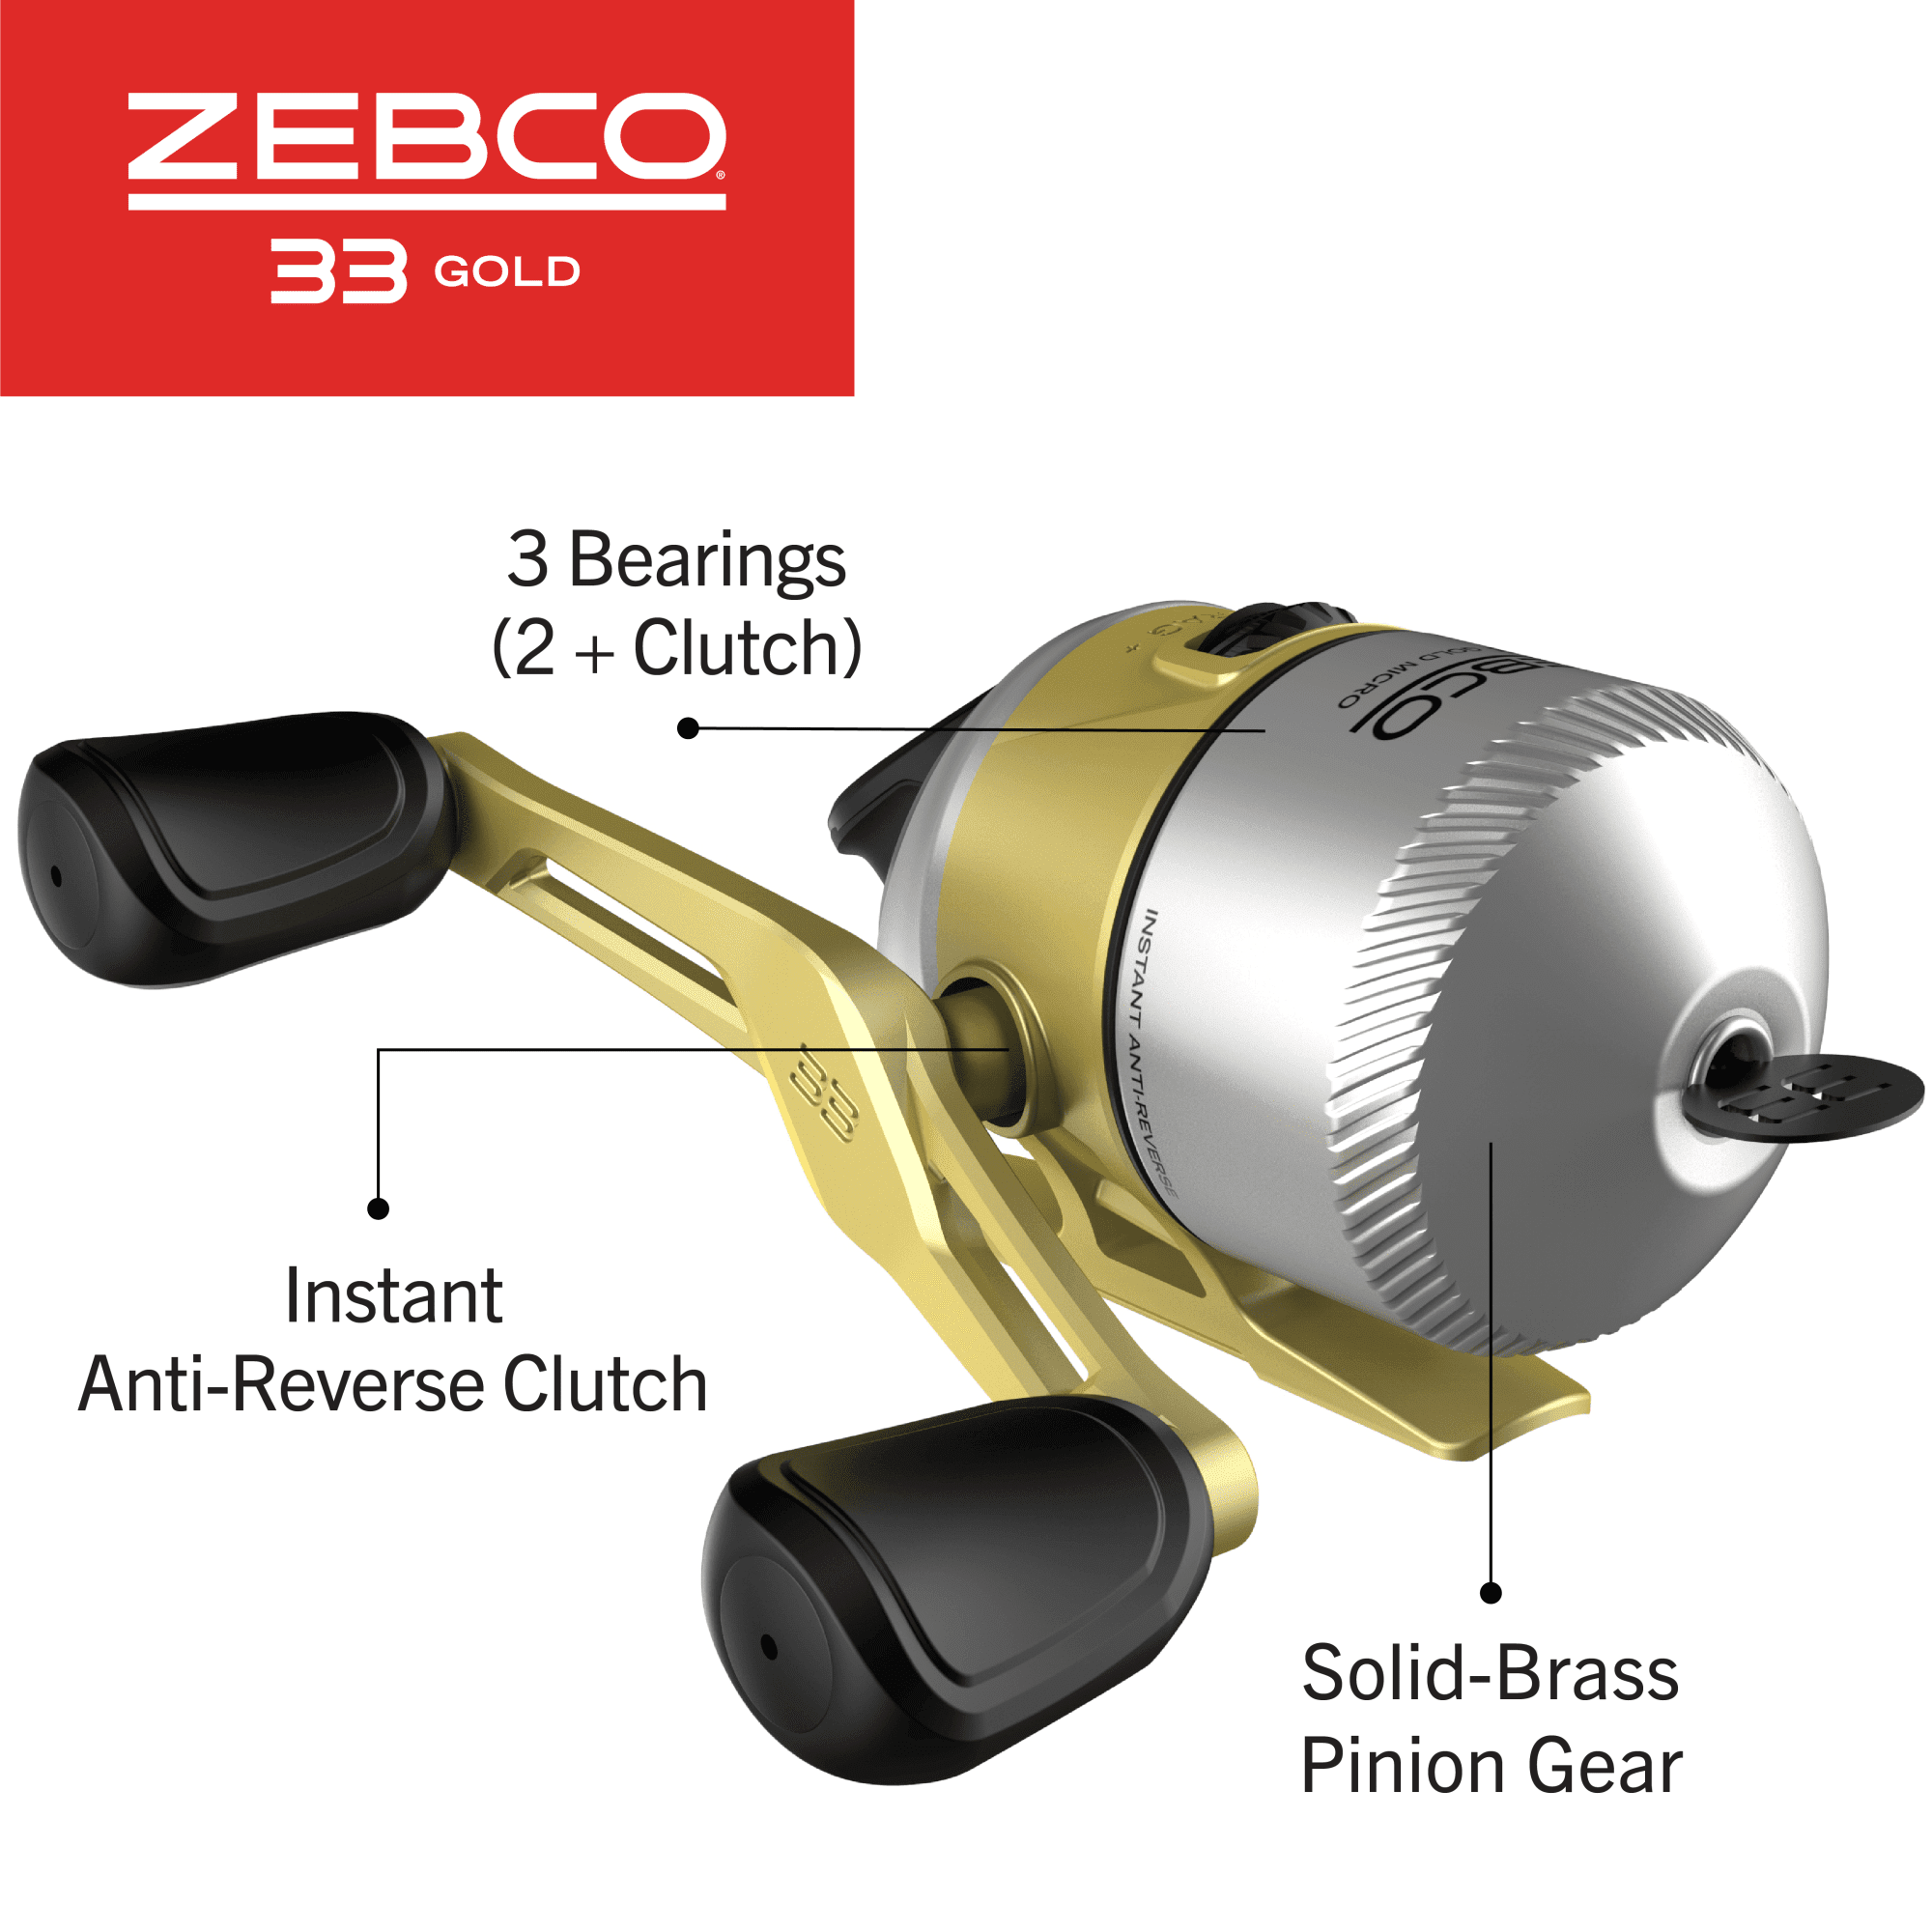 Zebco 33 Micro Trigger Spincast Fishing Reel, Size 10 Reel